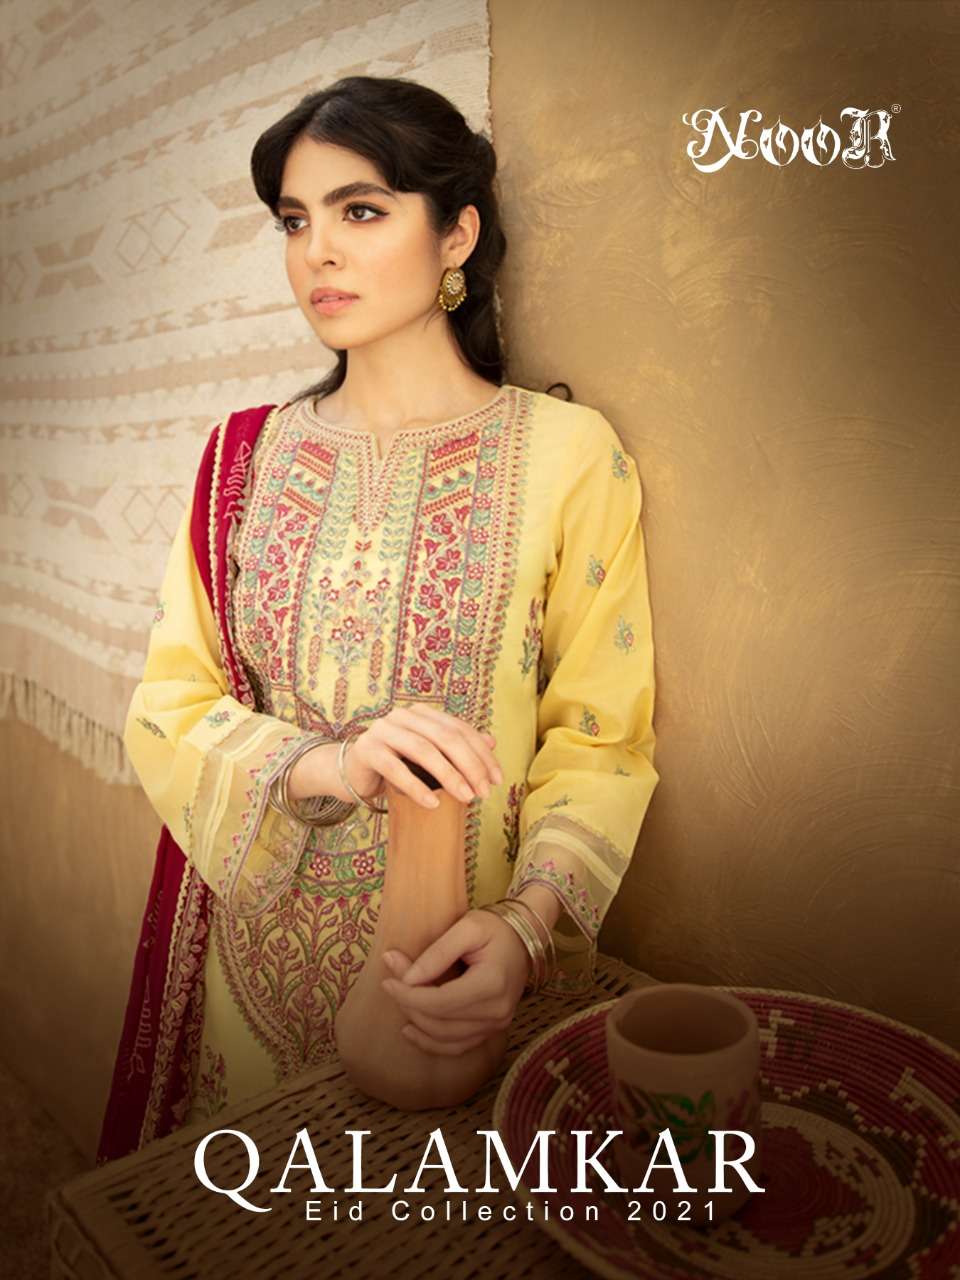 Noor Qalamkar Eid Collection Pure Cotton With embroidery Wor...